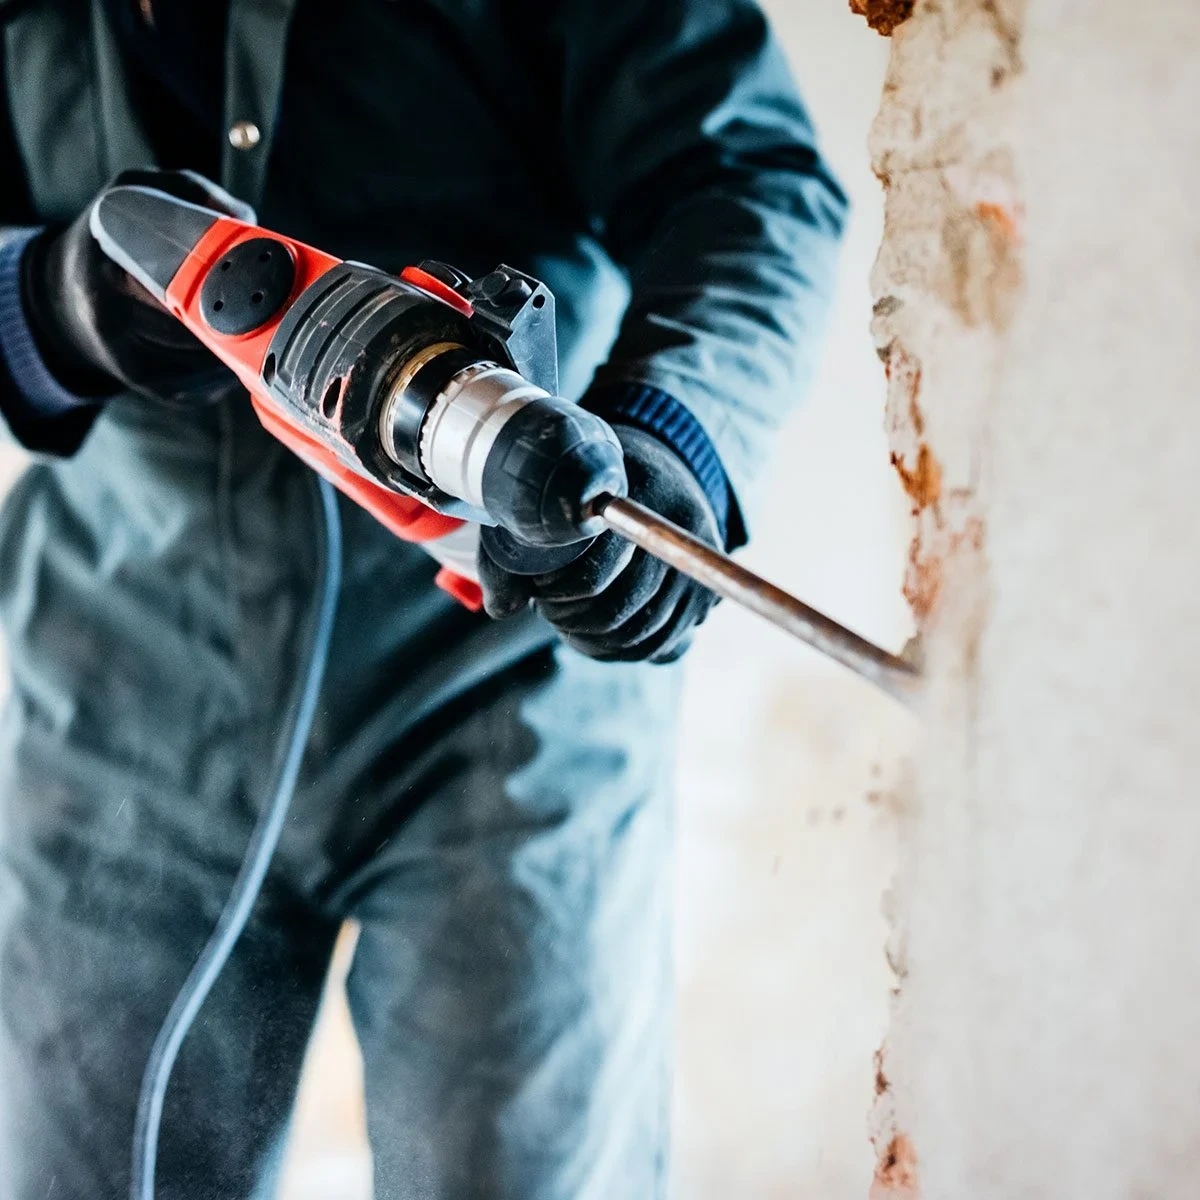 a man working with a rotary hammer